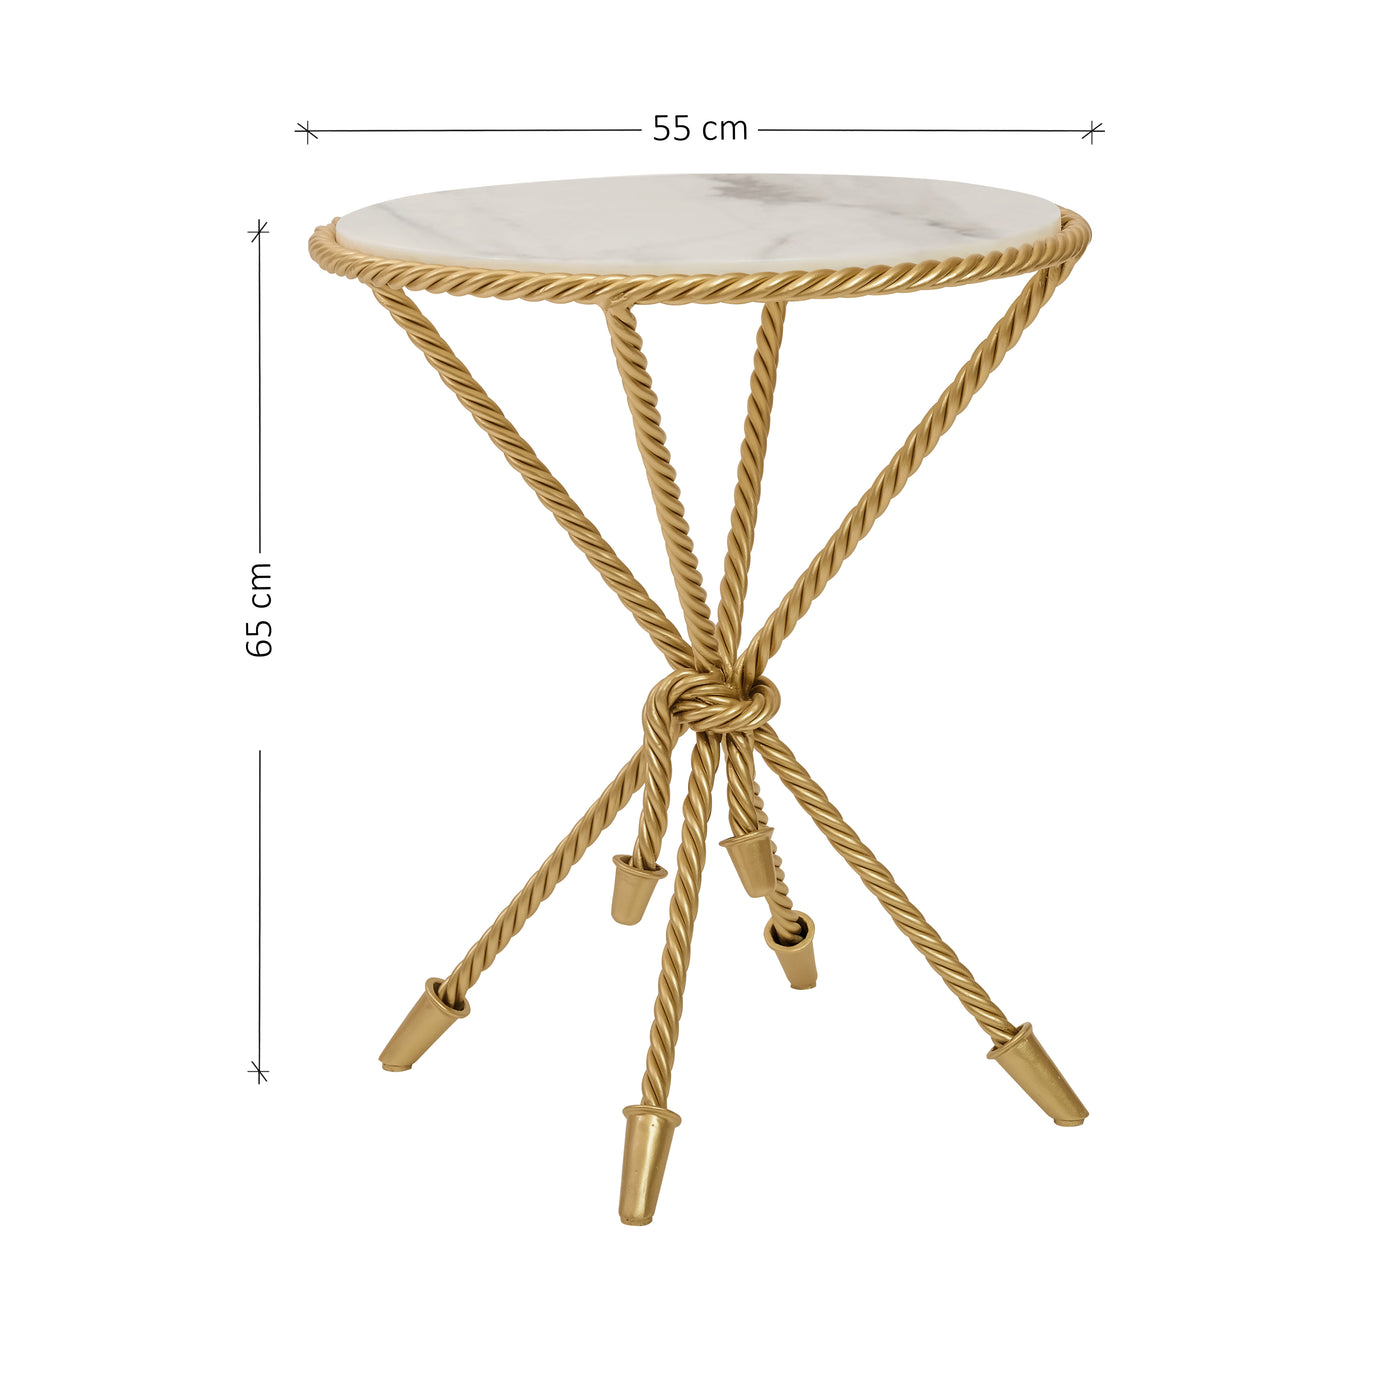 A unique rope-themed round accent table painted in gold and topped with white natural marble